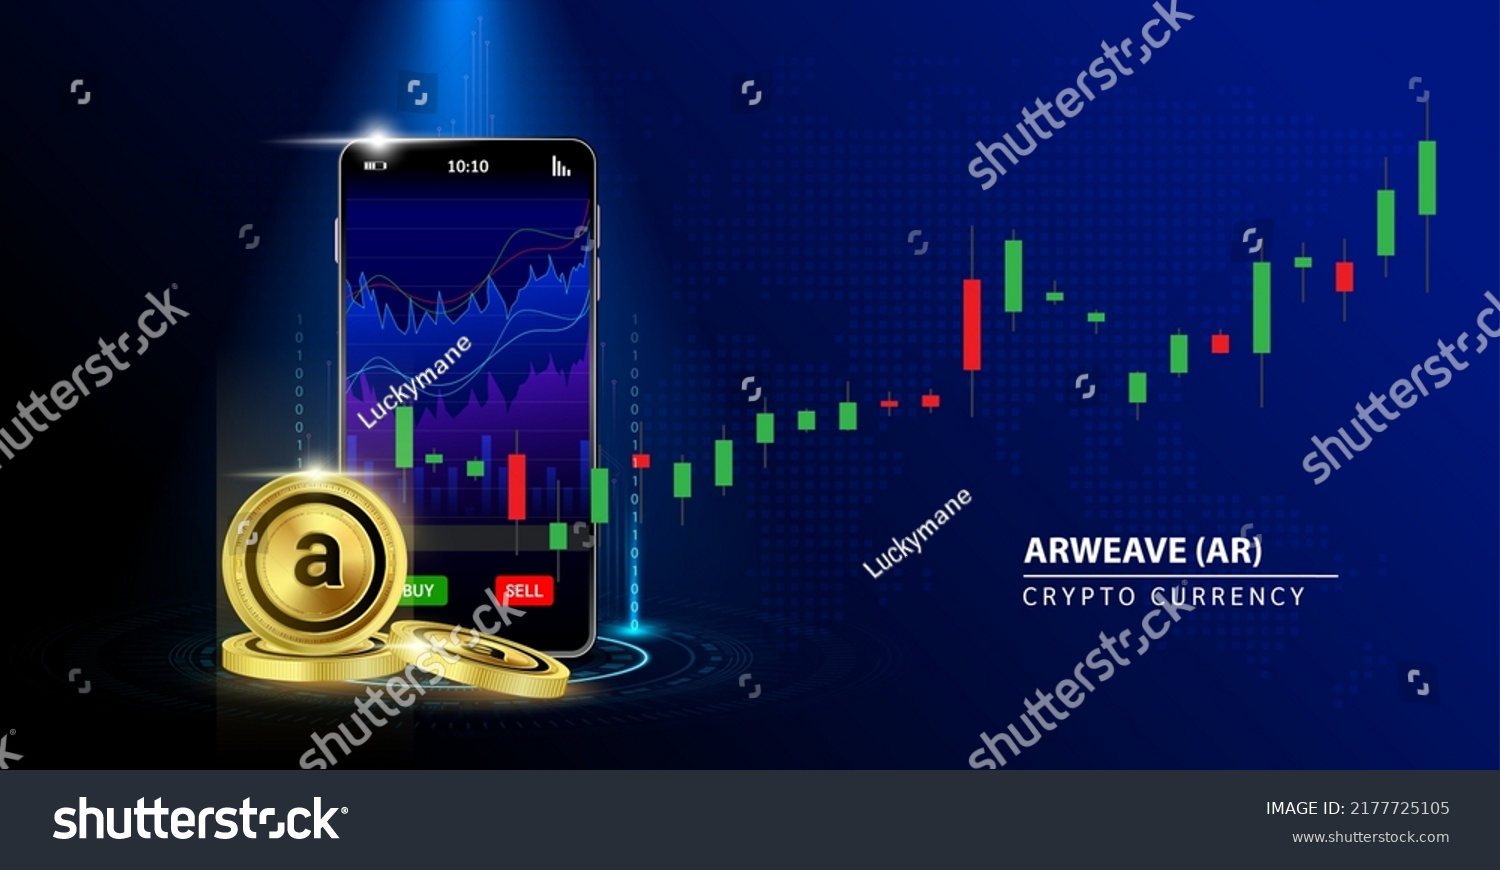 SVG of Arweave (AR) coin gold Online payment. Hand holding smartphone money  payment app bank. Secure mobile banking finance concept Blue background vector illustration. 3D Cryptocurrency blockchain. svg